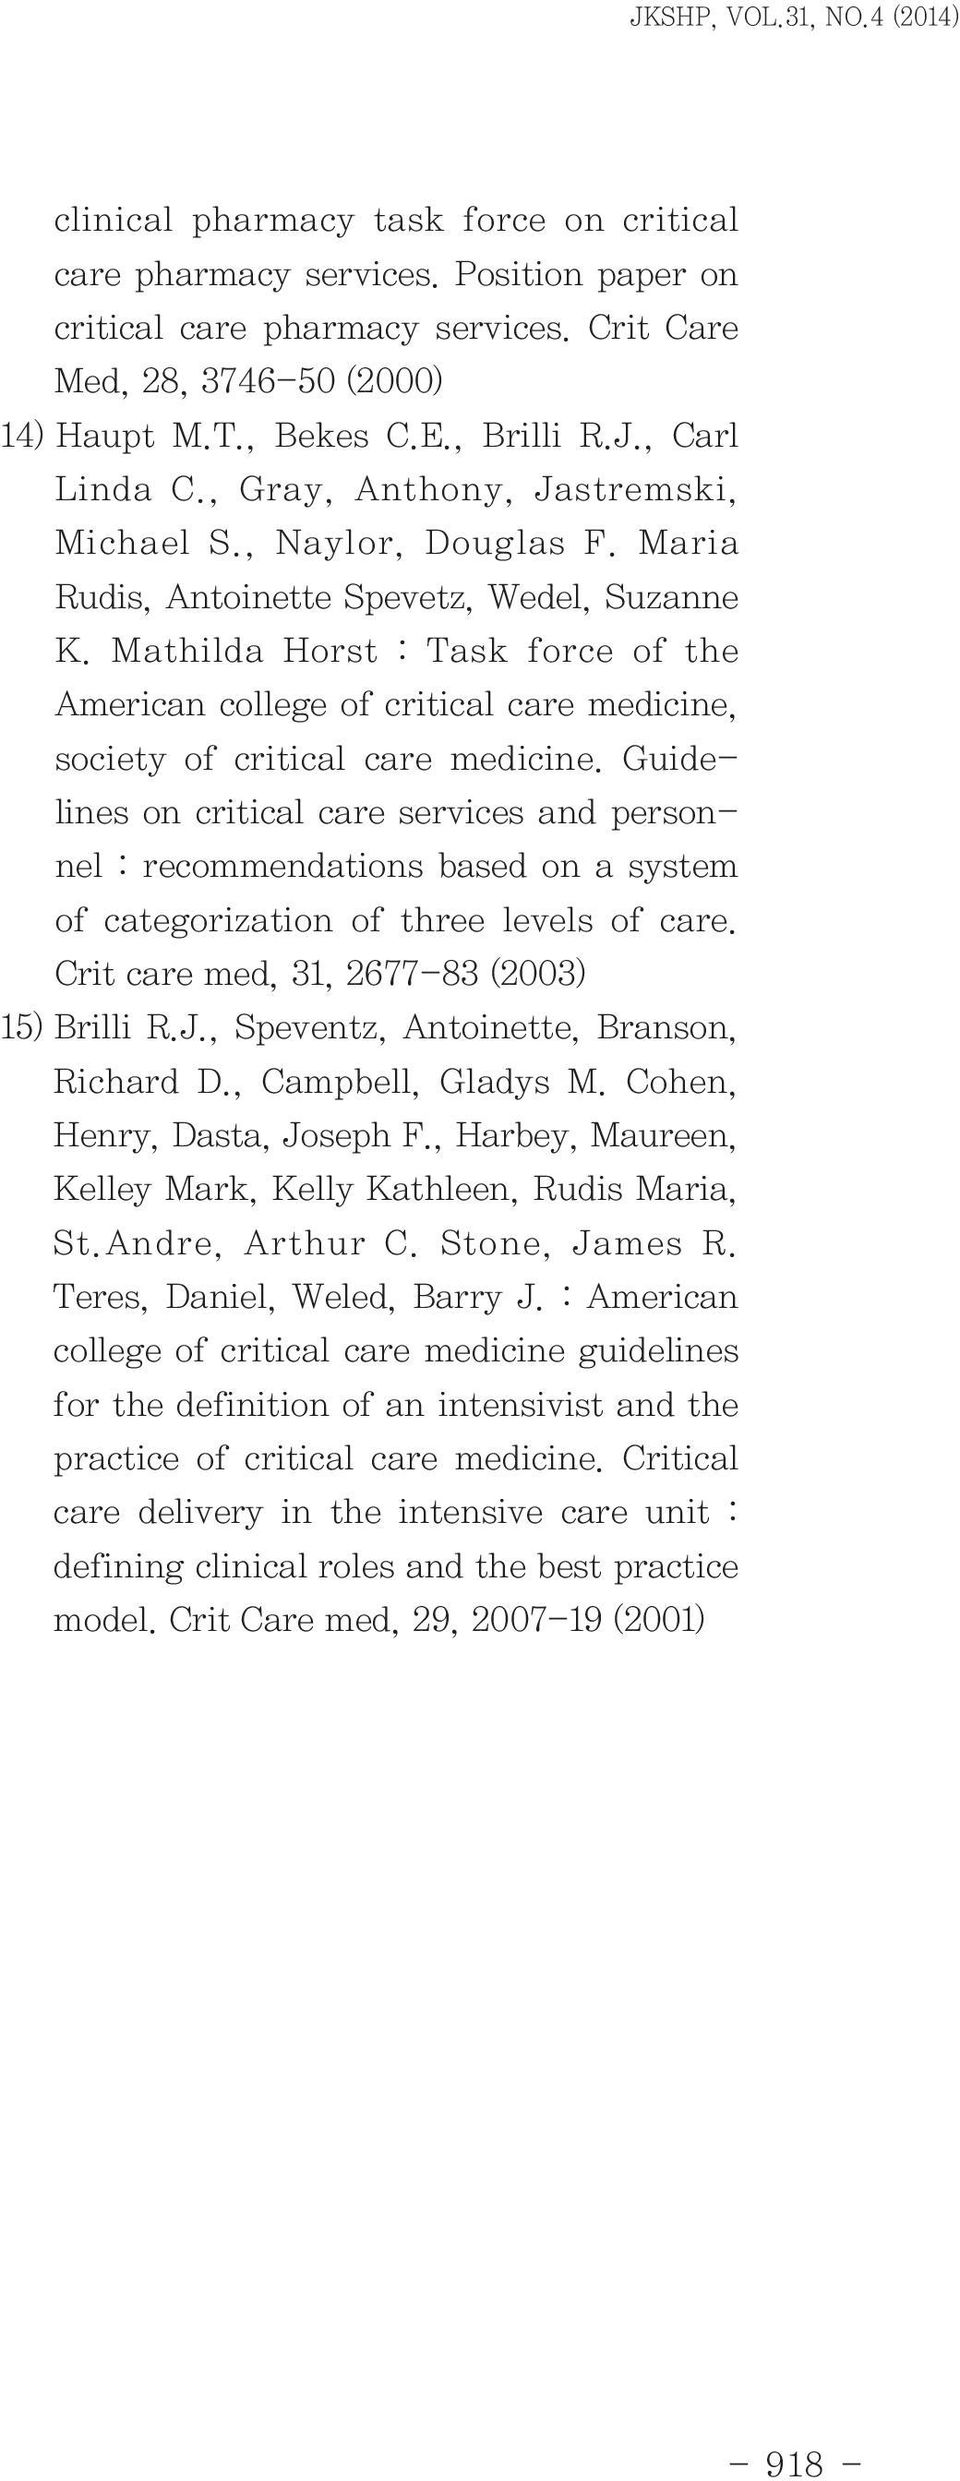 Mathilda Horst : Task force of the American college of critical care medicine, society of critical care medicine.